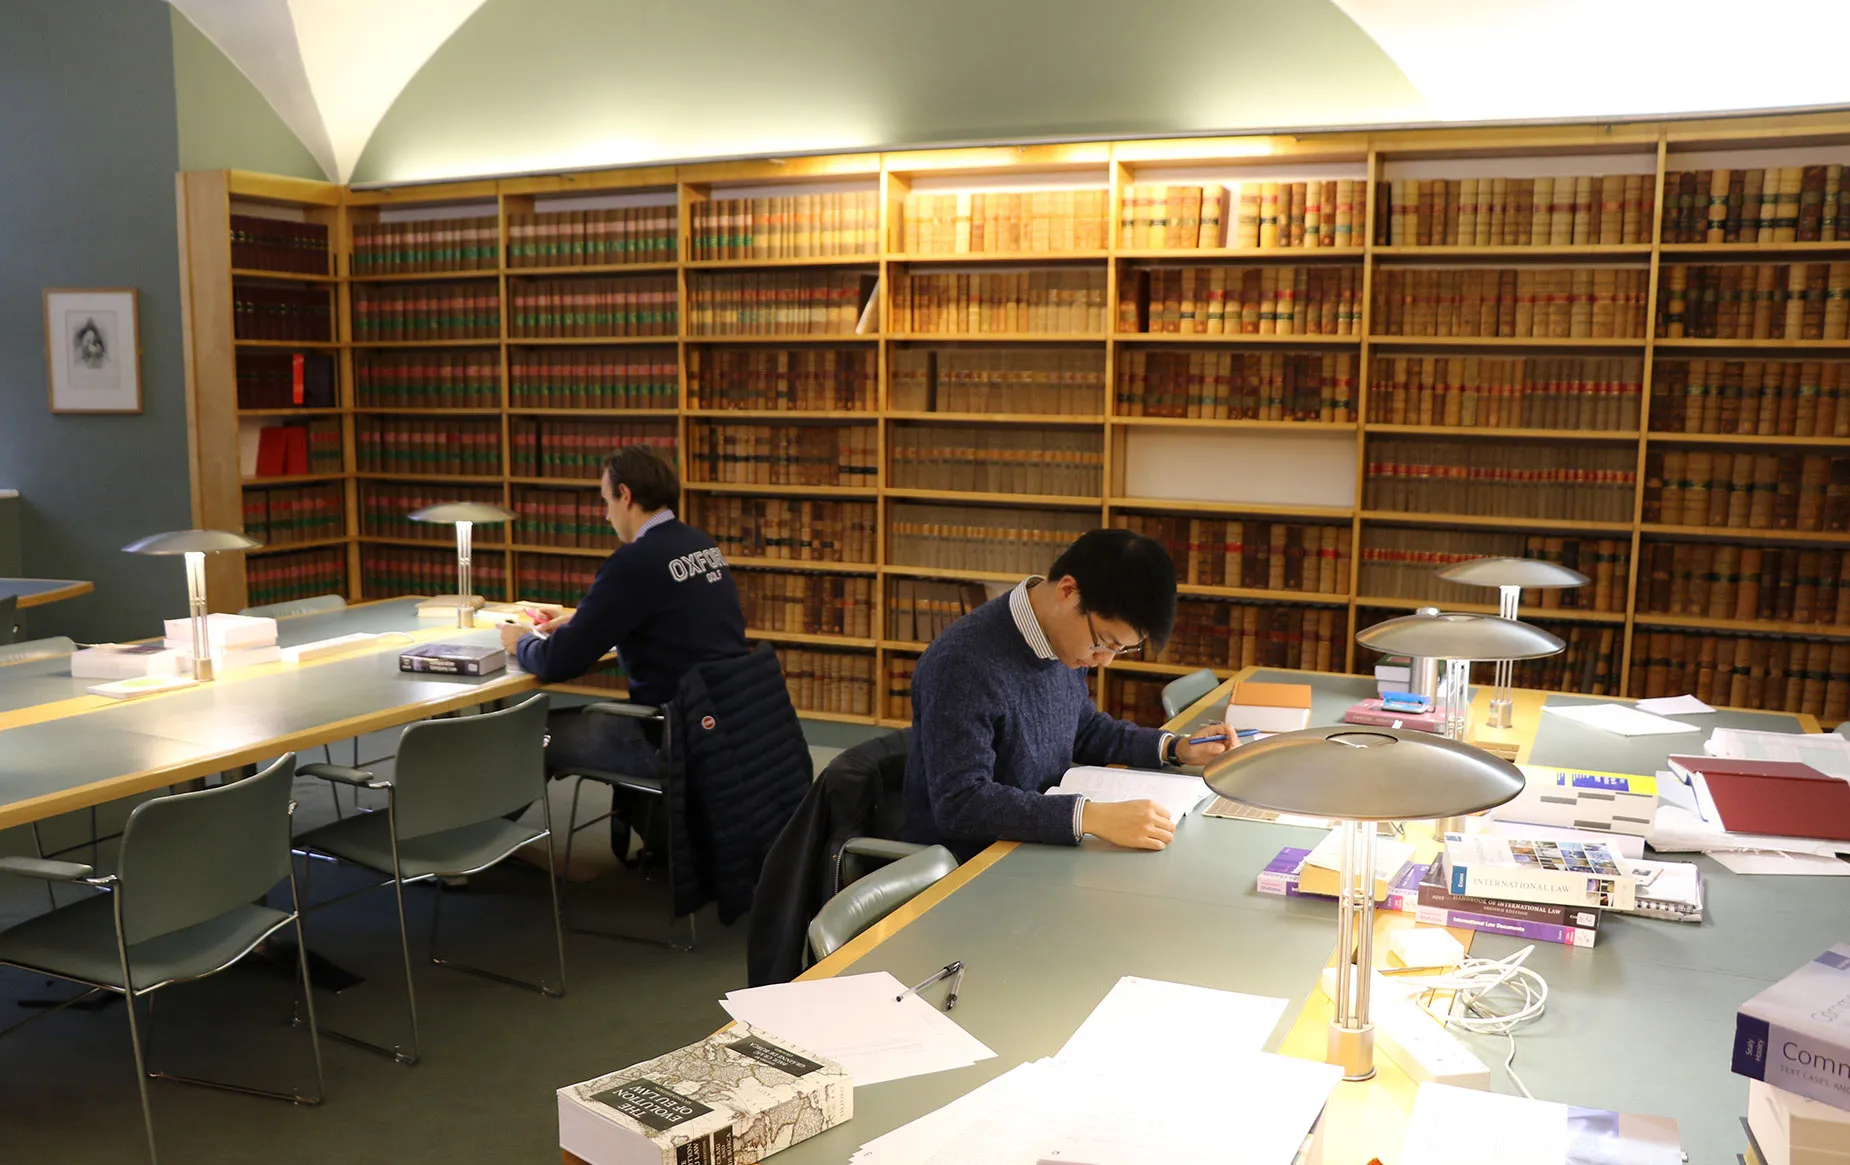 Students in the Burn Law Library